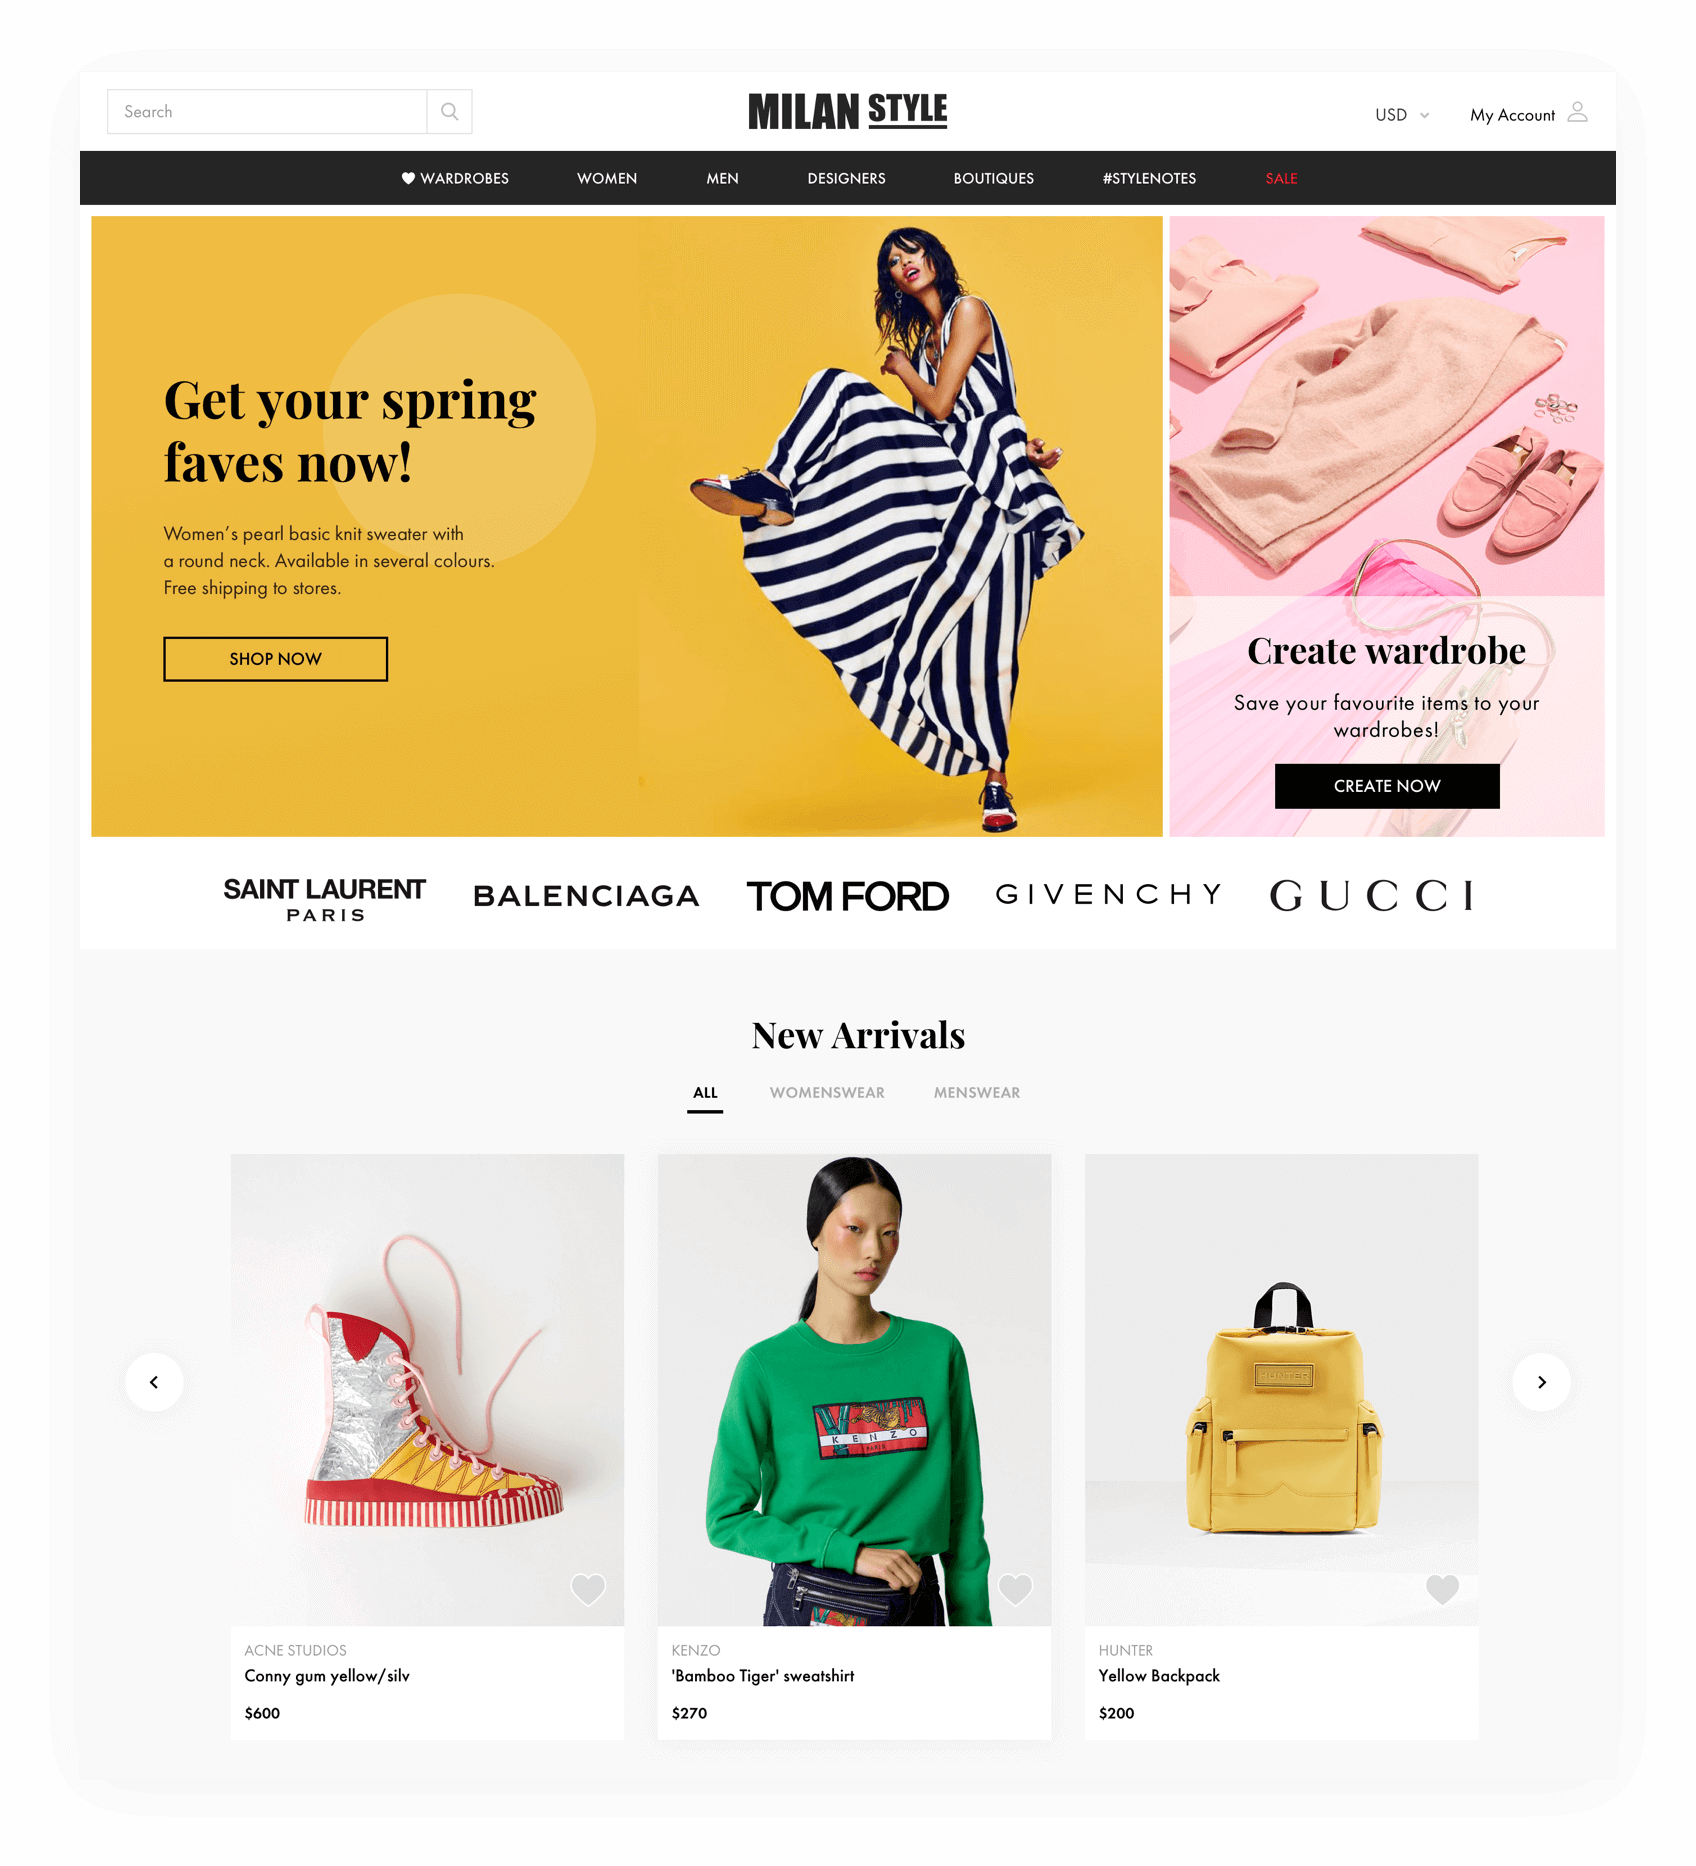 MilanStyle. Redesigned pages